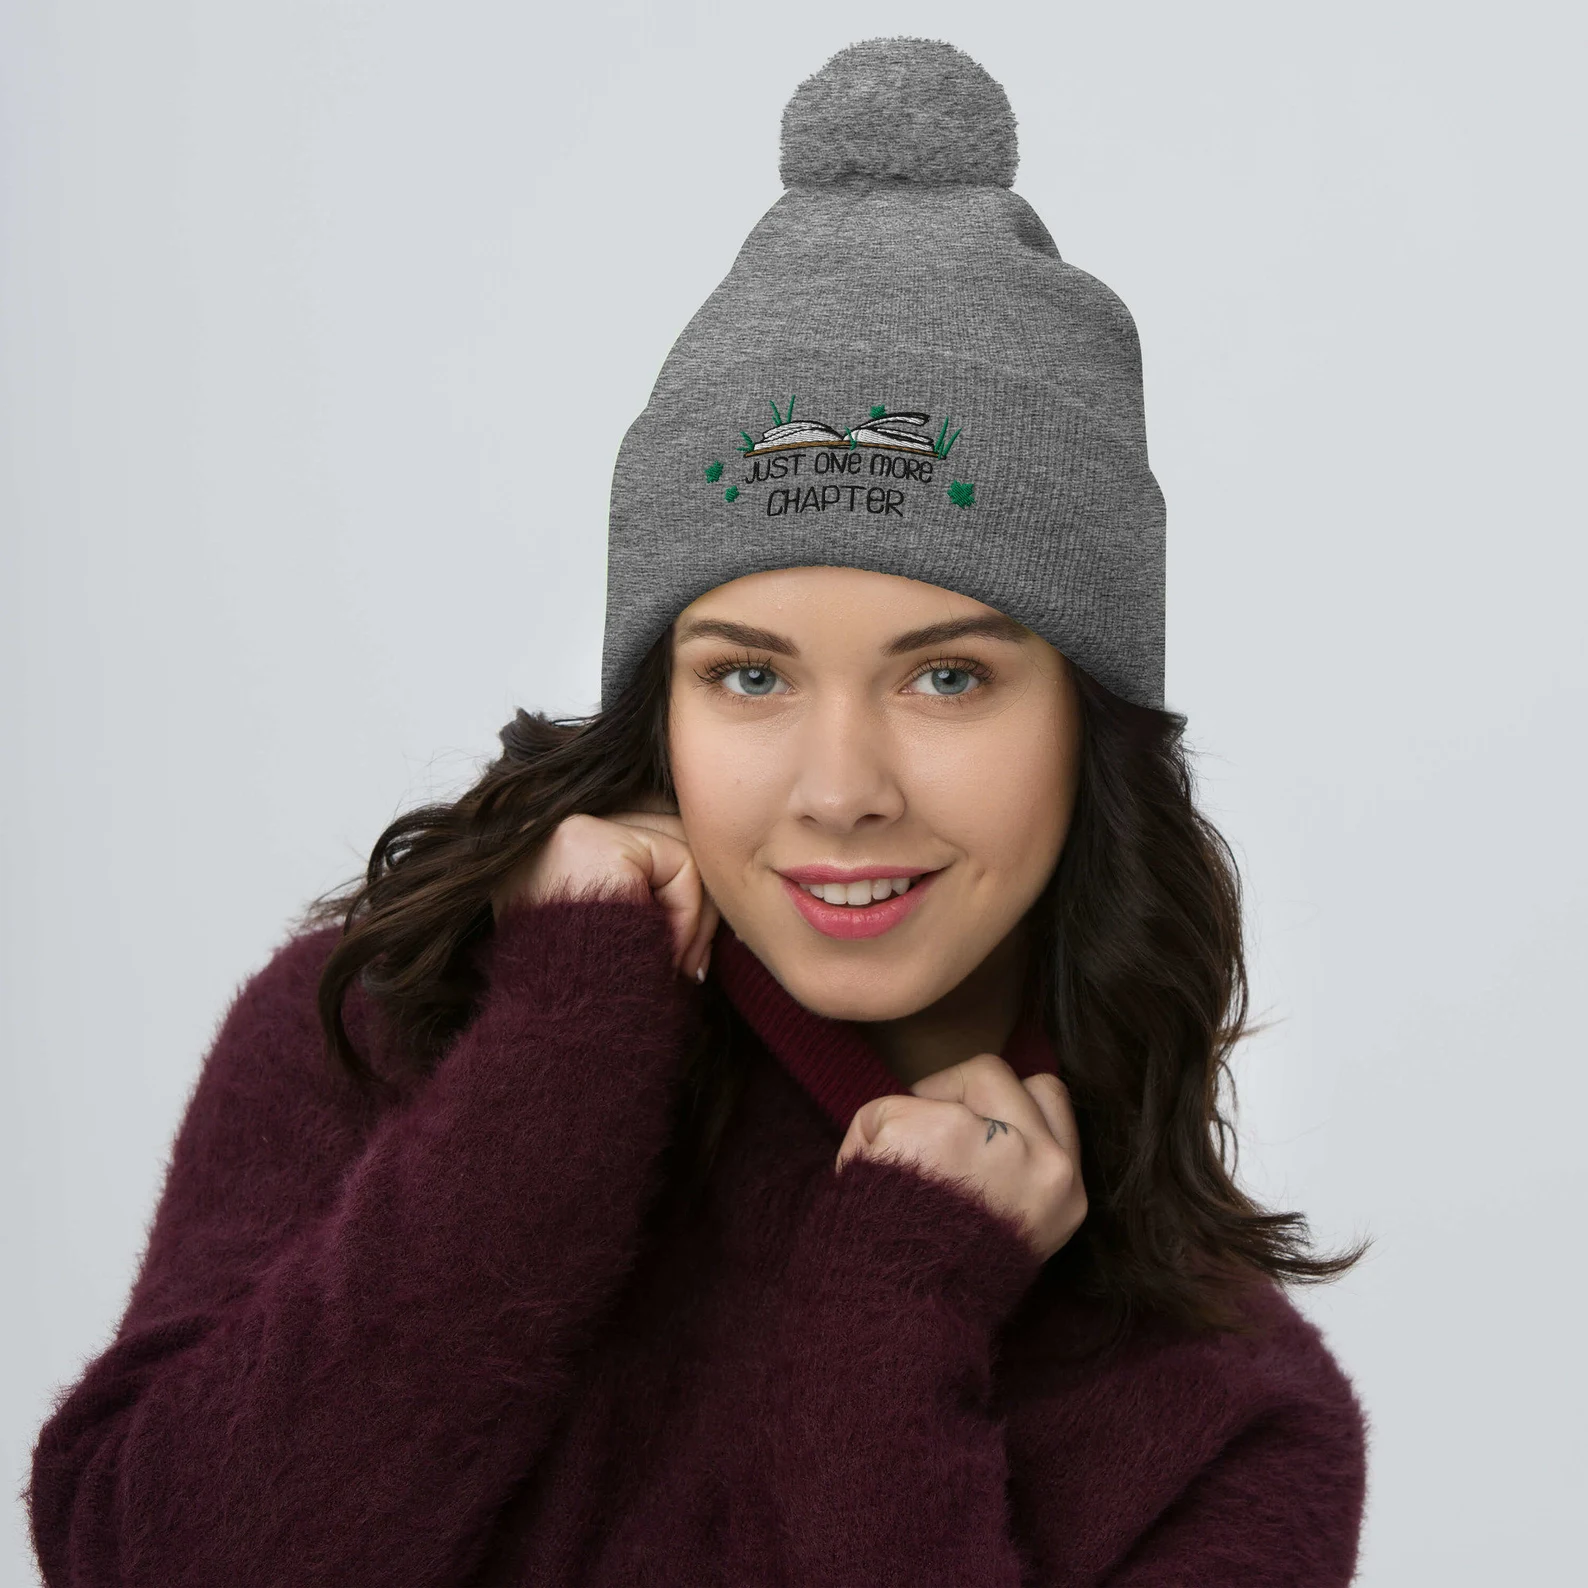 A woman wearing a gray beanie that says "Just One More Chapter".